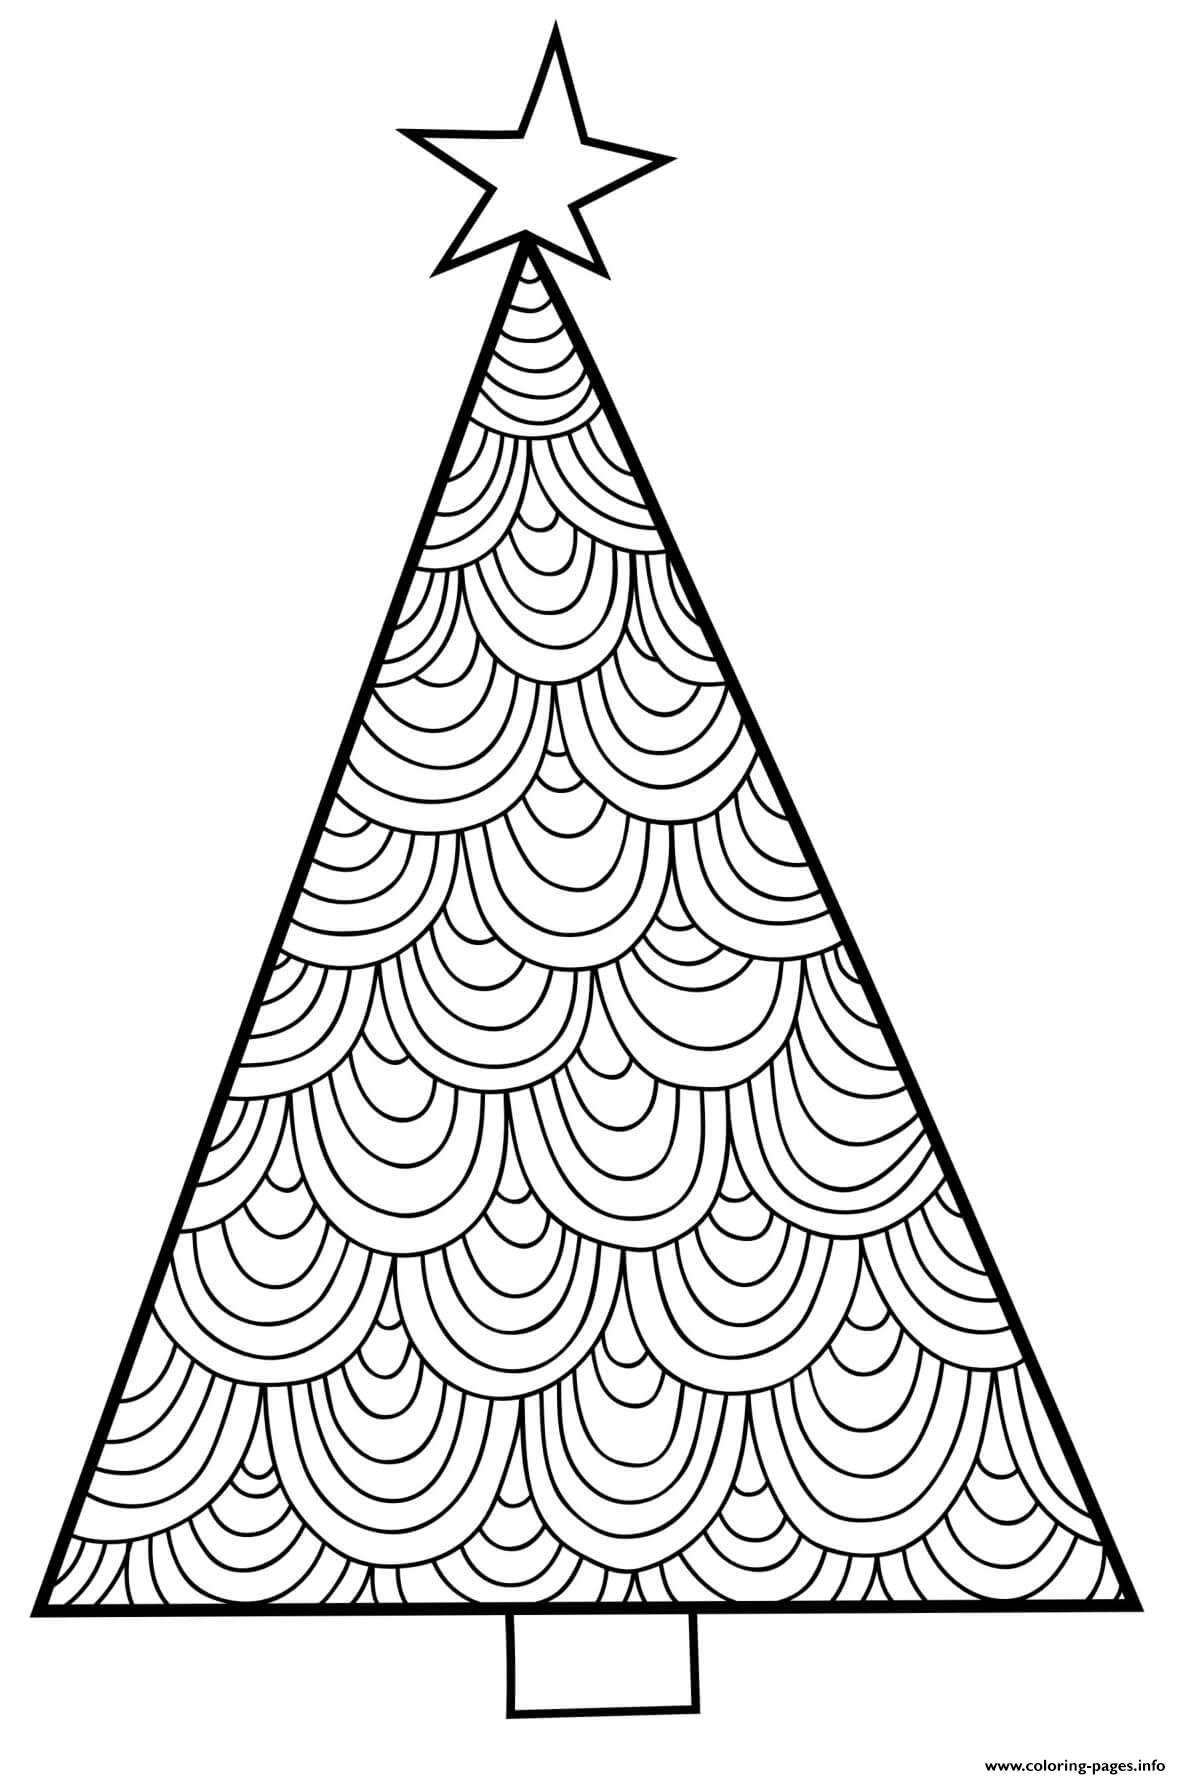 Christmas Patterned Tree coloring